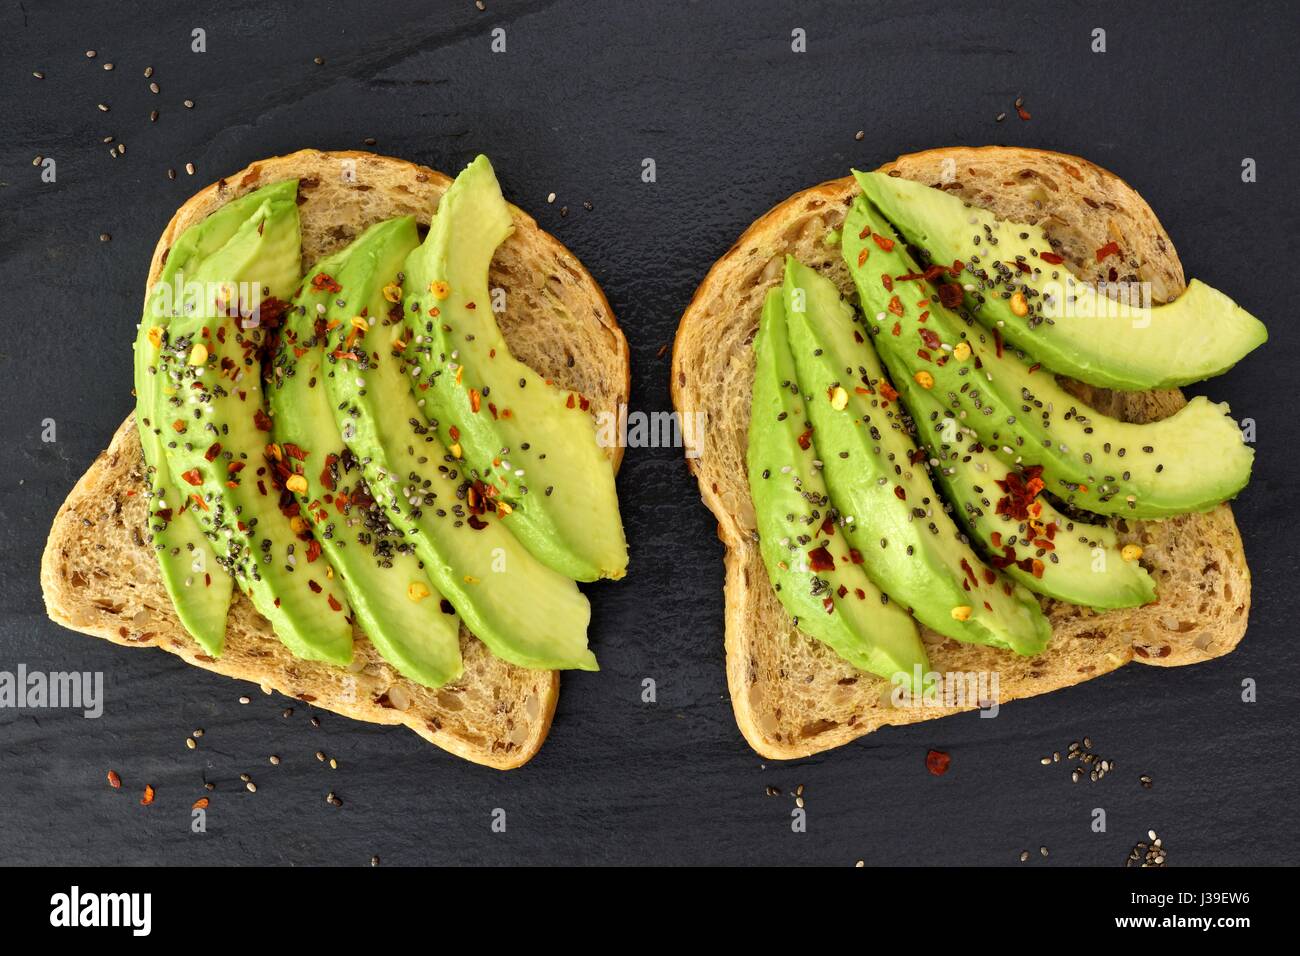 Open avocado sandwiches with chia seeds on whole grain bread against a dark slate background Stock Photo